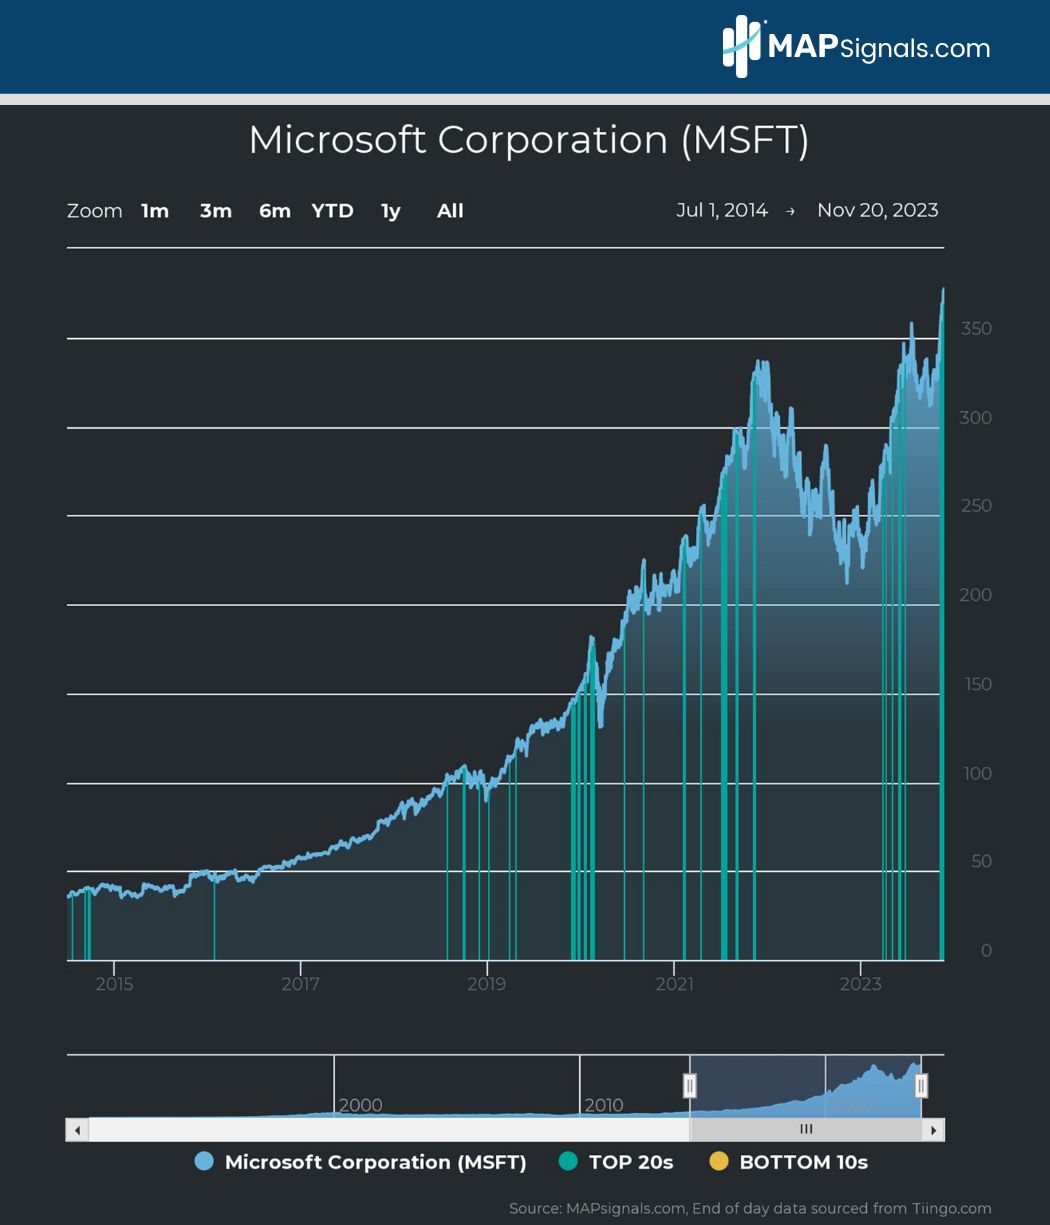 Microsoft Corp. (MSFT) TOP 20 signals since 2014 | MAPsignals